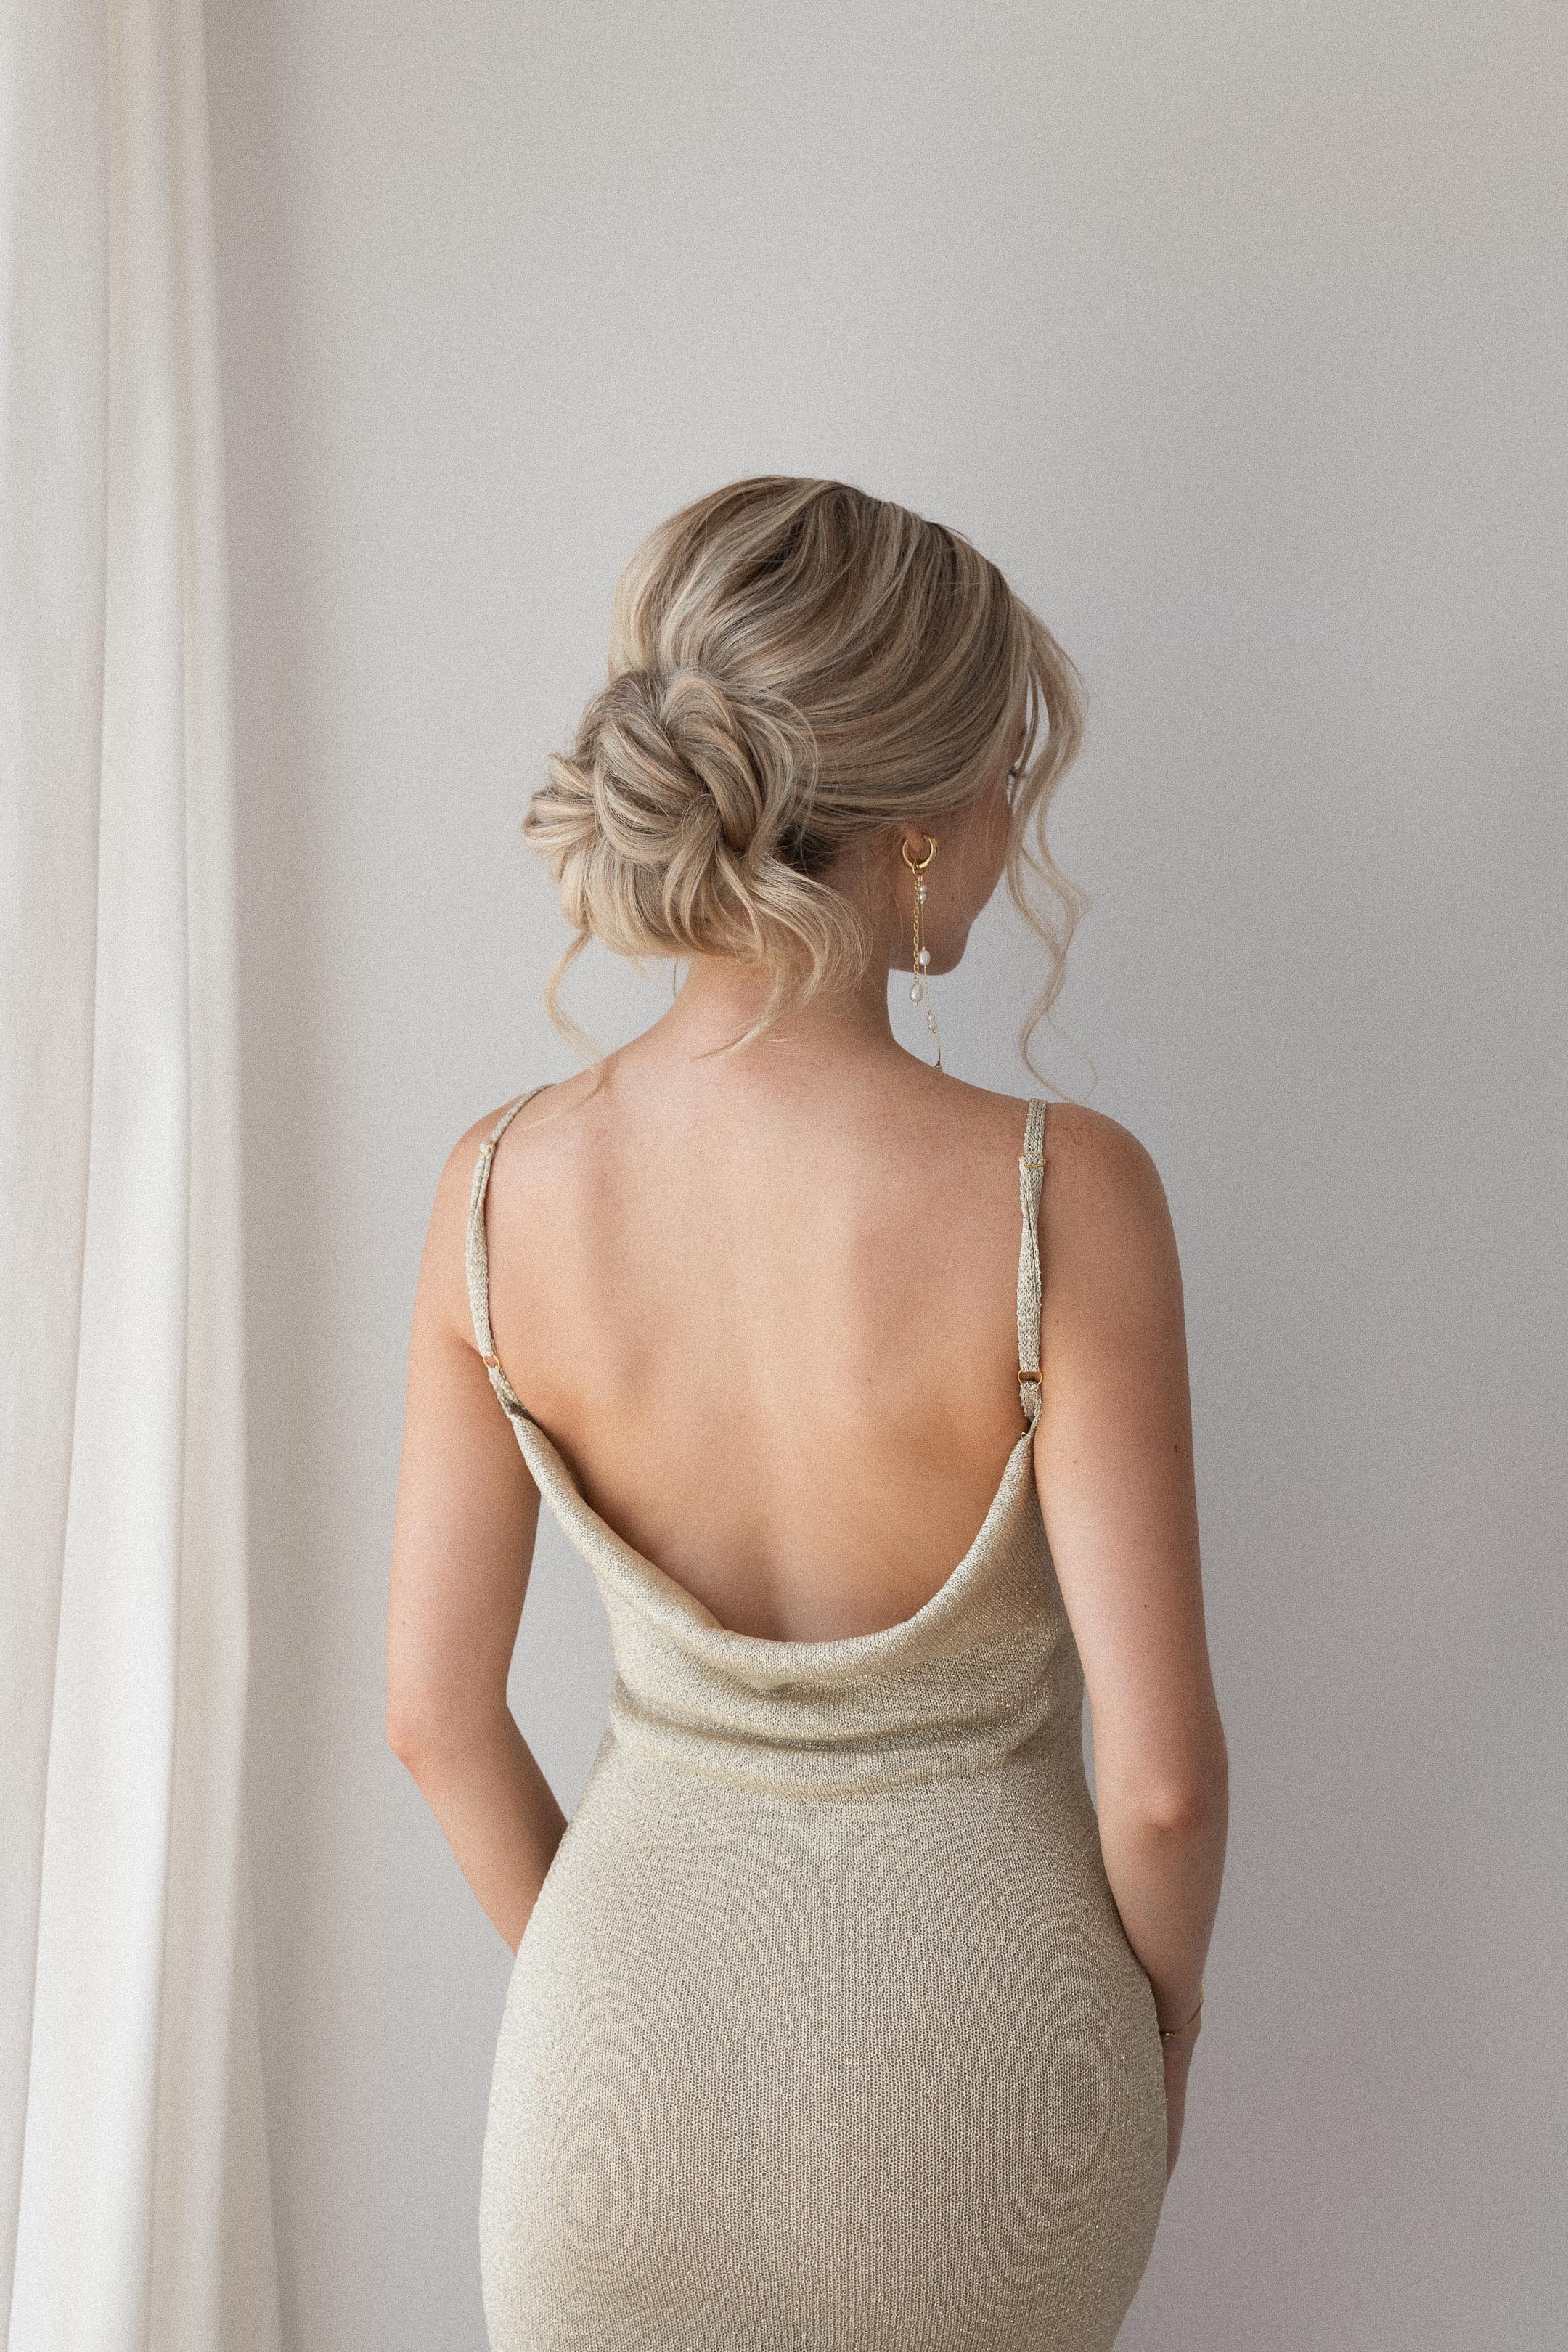 35 Wedding Updos Perfect for Long Hair